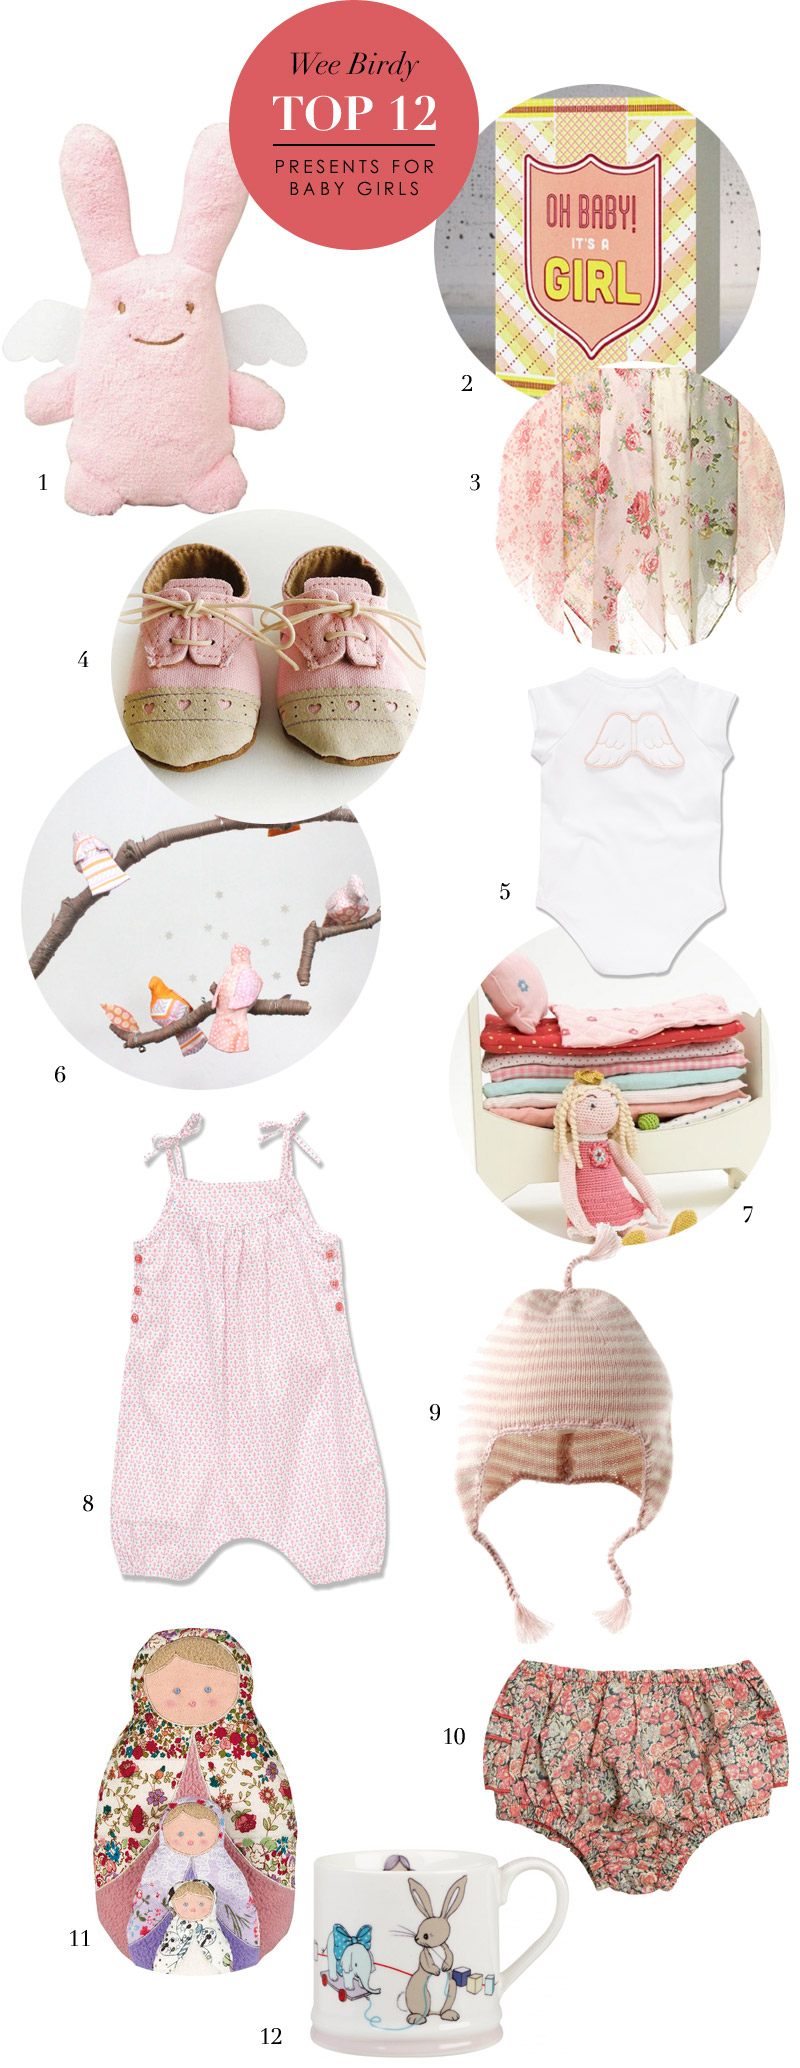 12 Best Presents for a Baby Girl via WeeBirdy.com